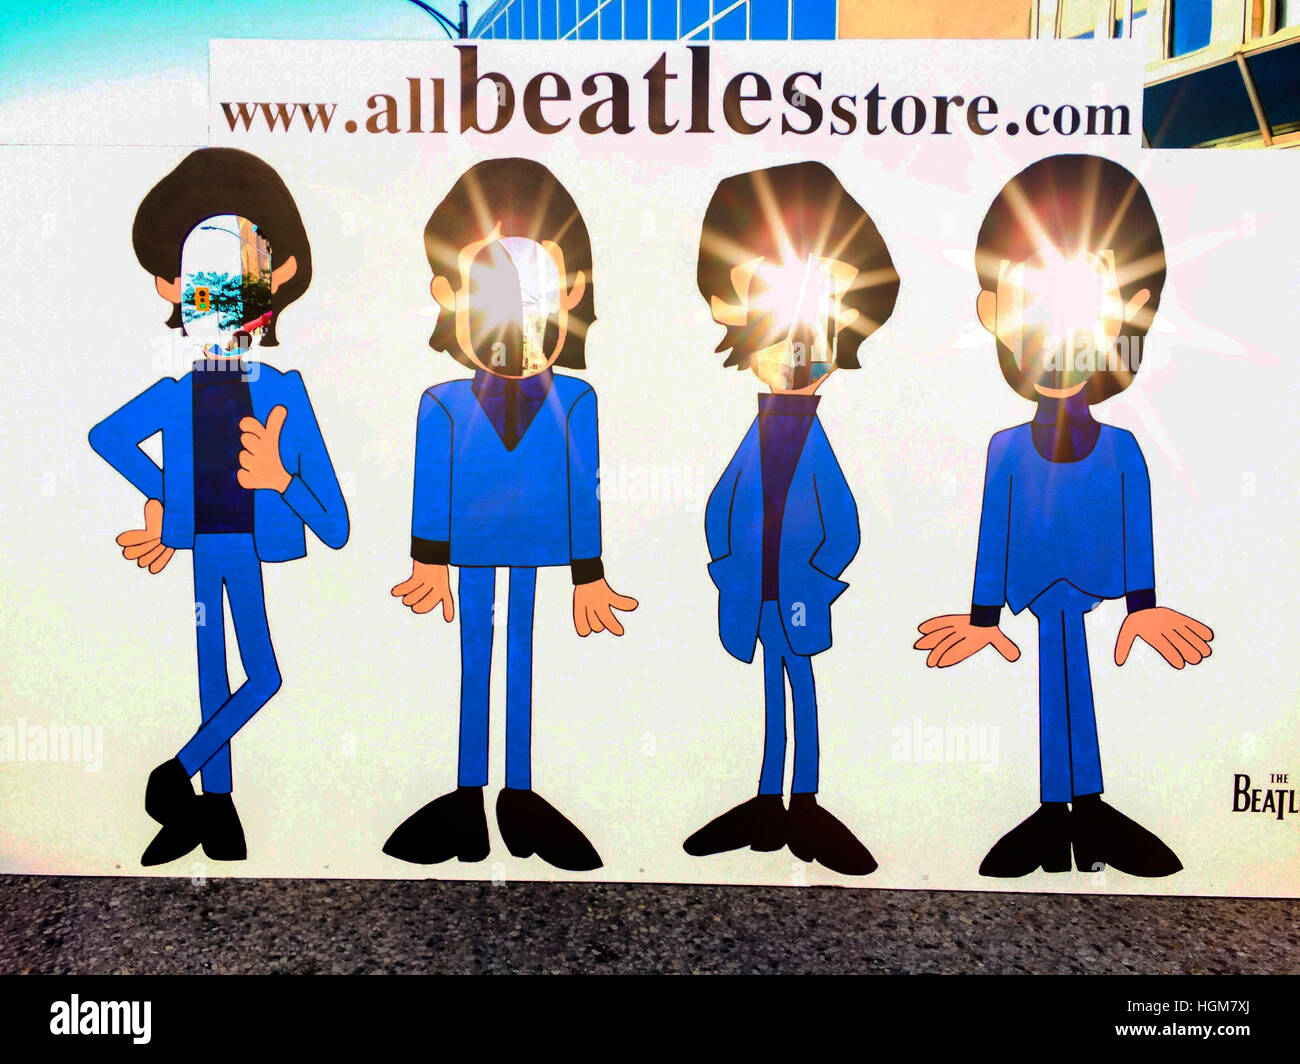 Sign for the First Beatles Festival, London, ON, Canada. Life size figures of all with look through cutouts. Souvenir prop. Street-side. Photo op. Stock Photo